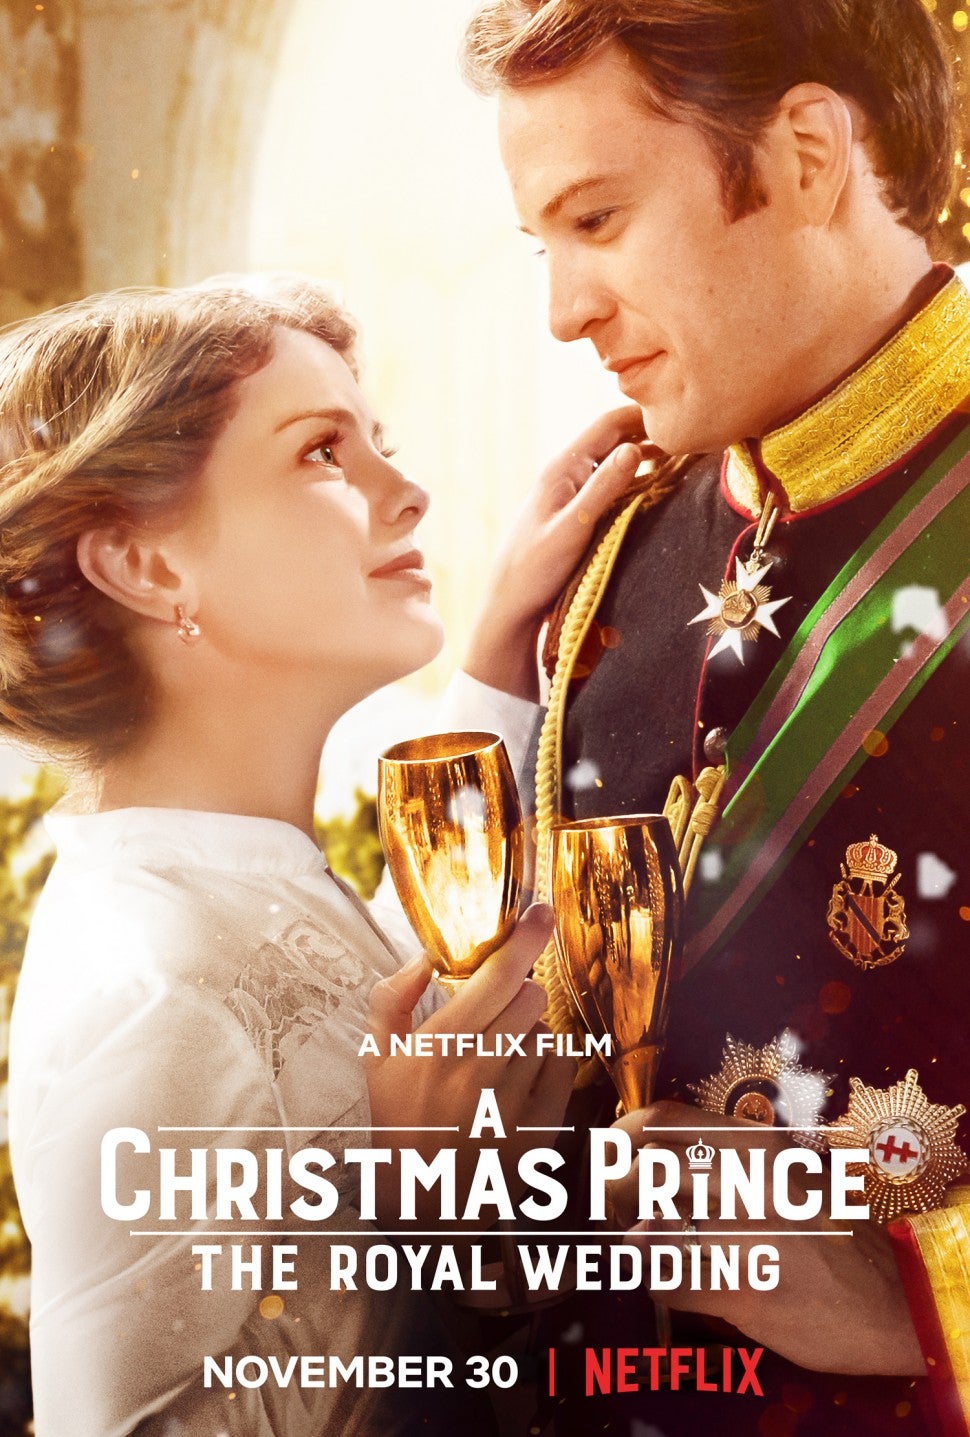 The First Trailer for 'A Christmas Prince: The Royal Wedding' Is Here! | Entertainment Tonight